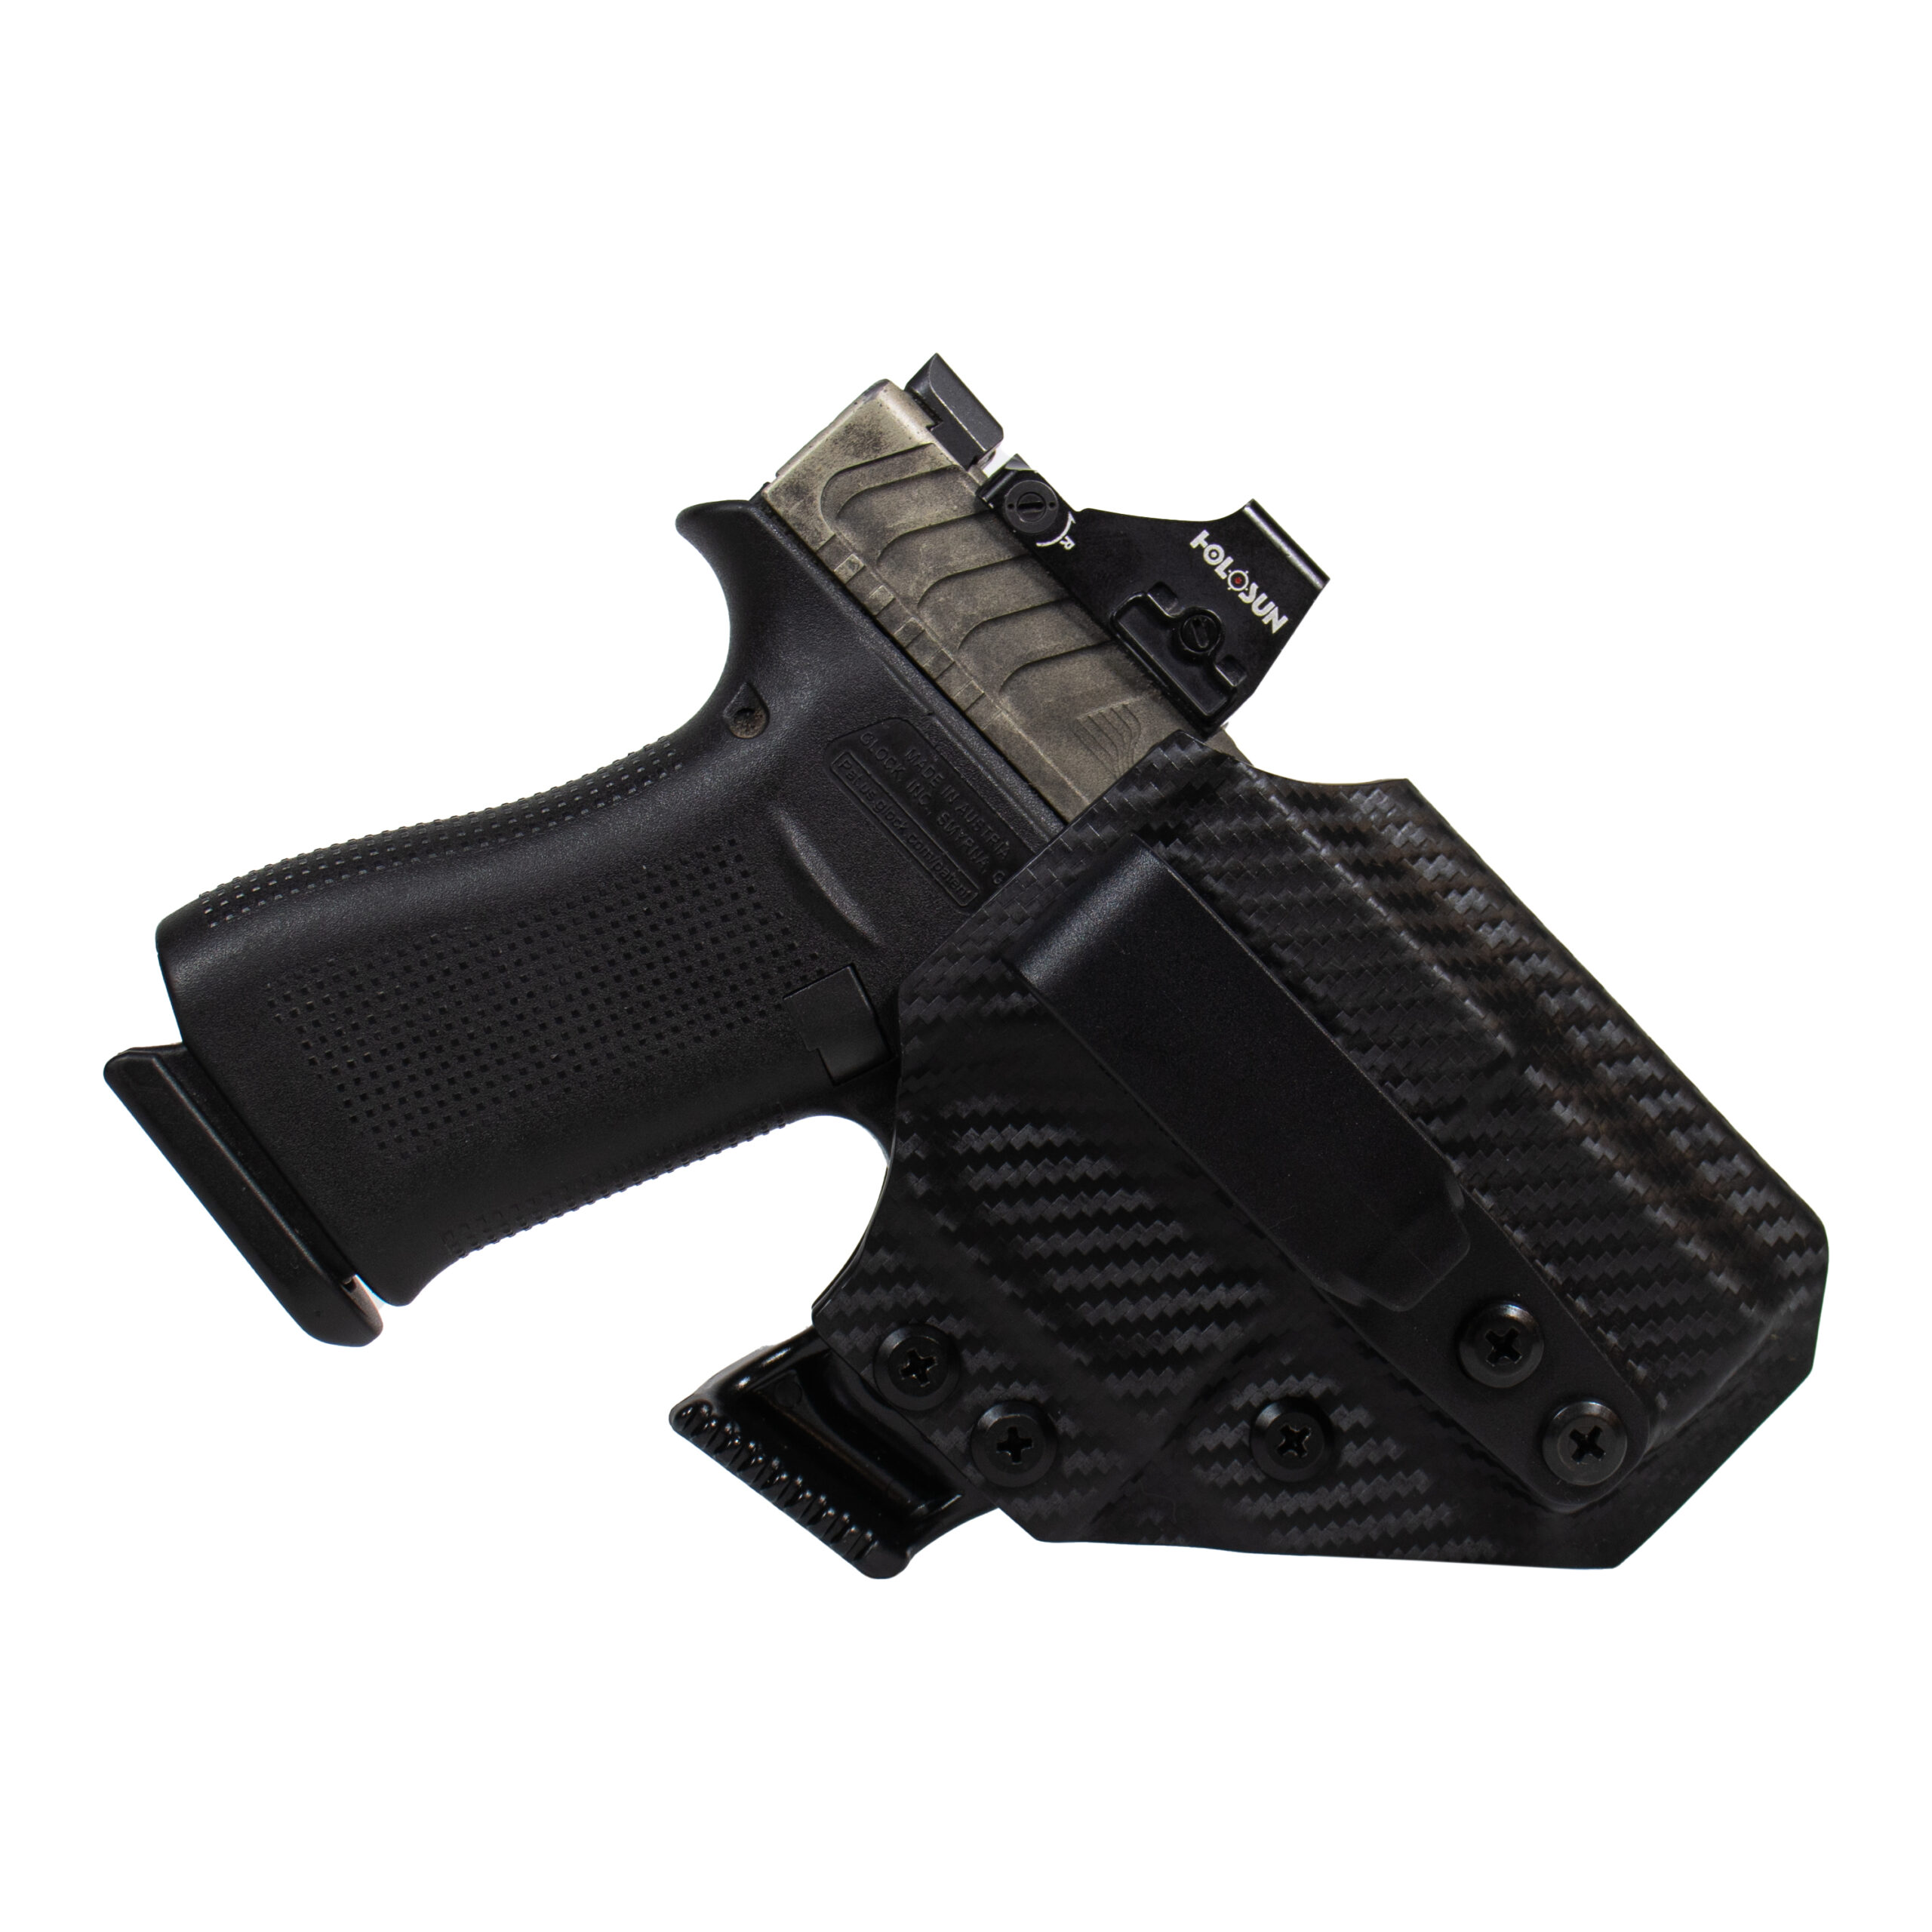 Inside Waistband Kydex Holster Carbon Hybrid Armory Capsule Pro Right Hand 